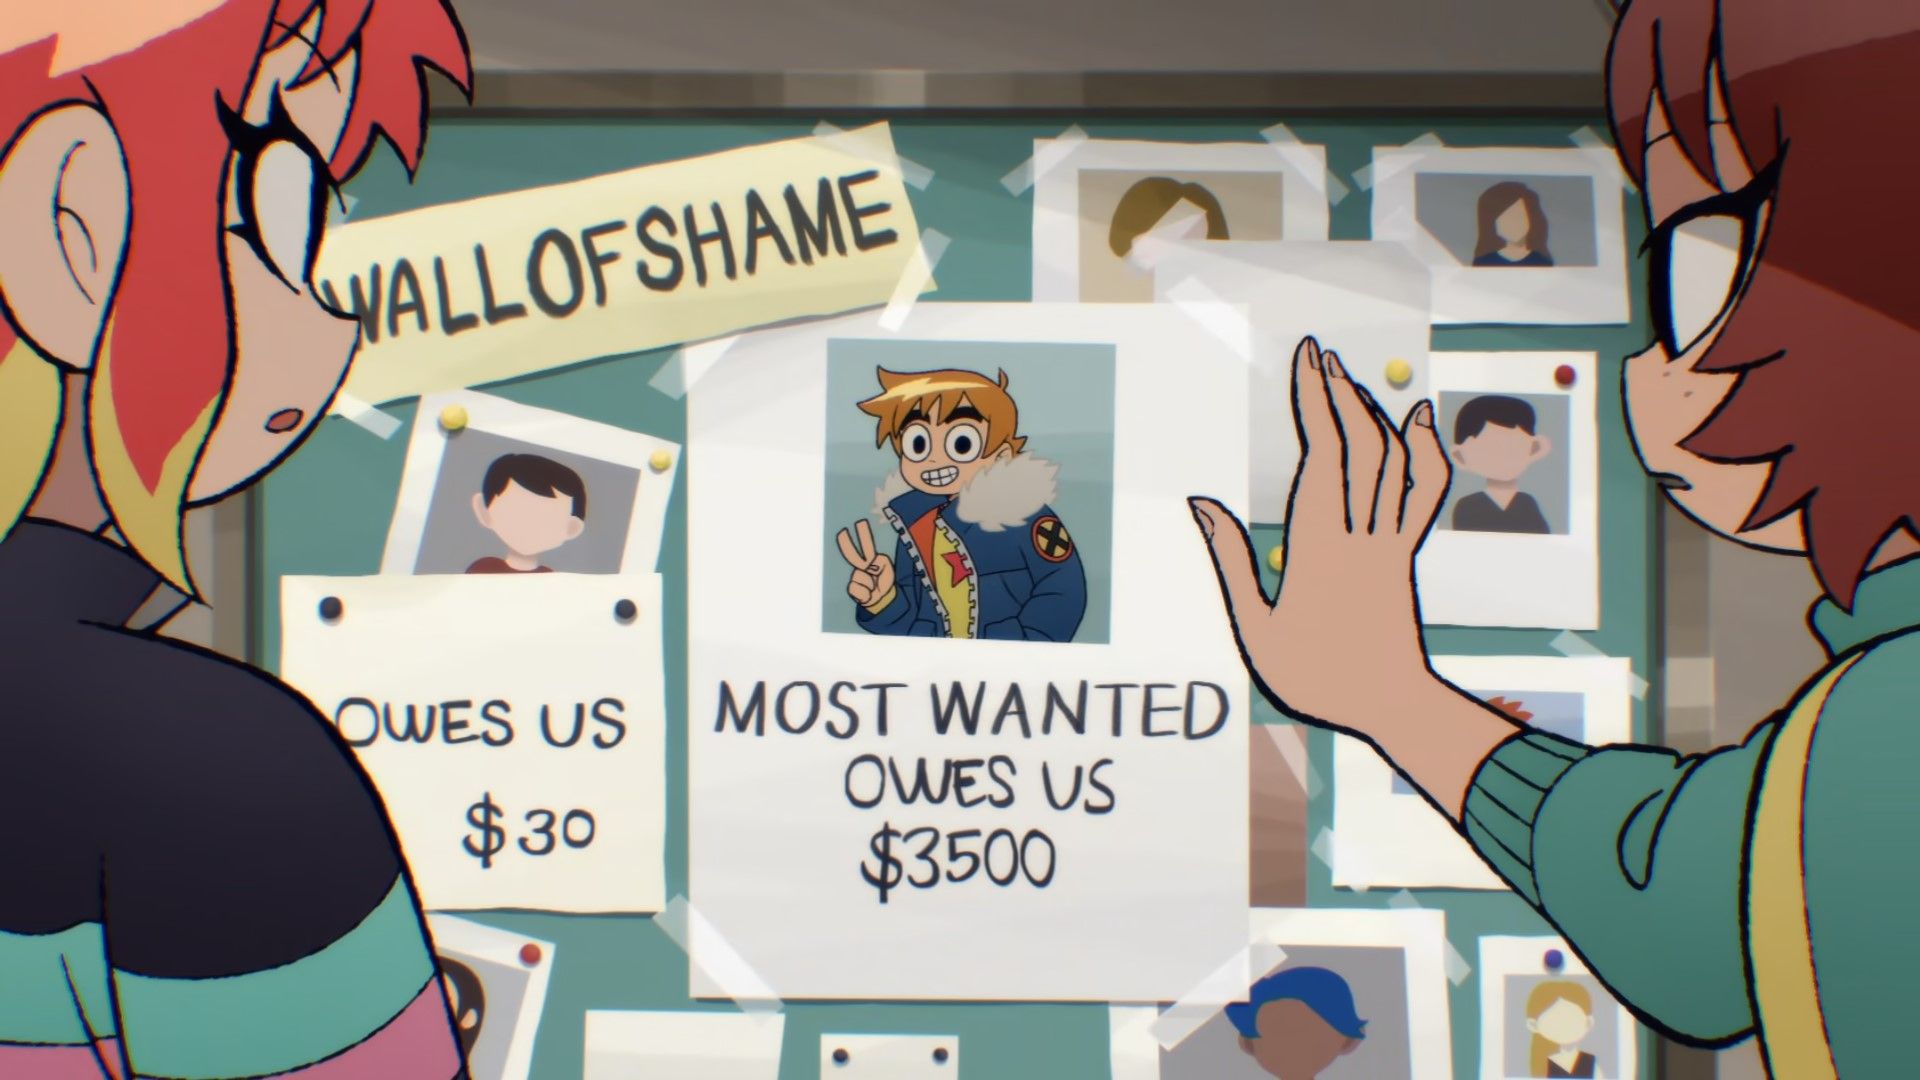 Screenshot from Netflix anime Scott Pilgrim Takes Off shows Scott's Most Wanted poster at his local movie rental store that says he owes $3500 in late fees.